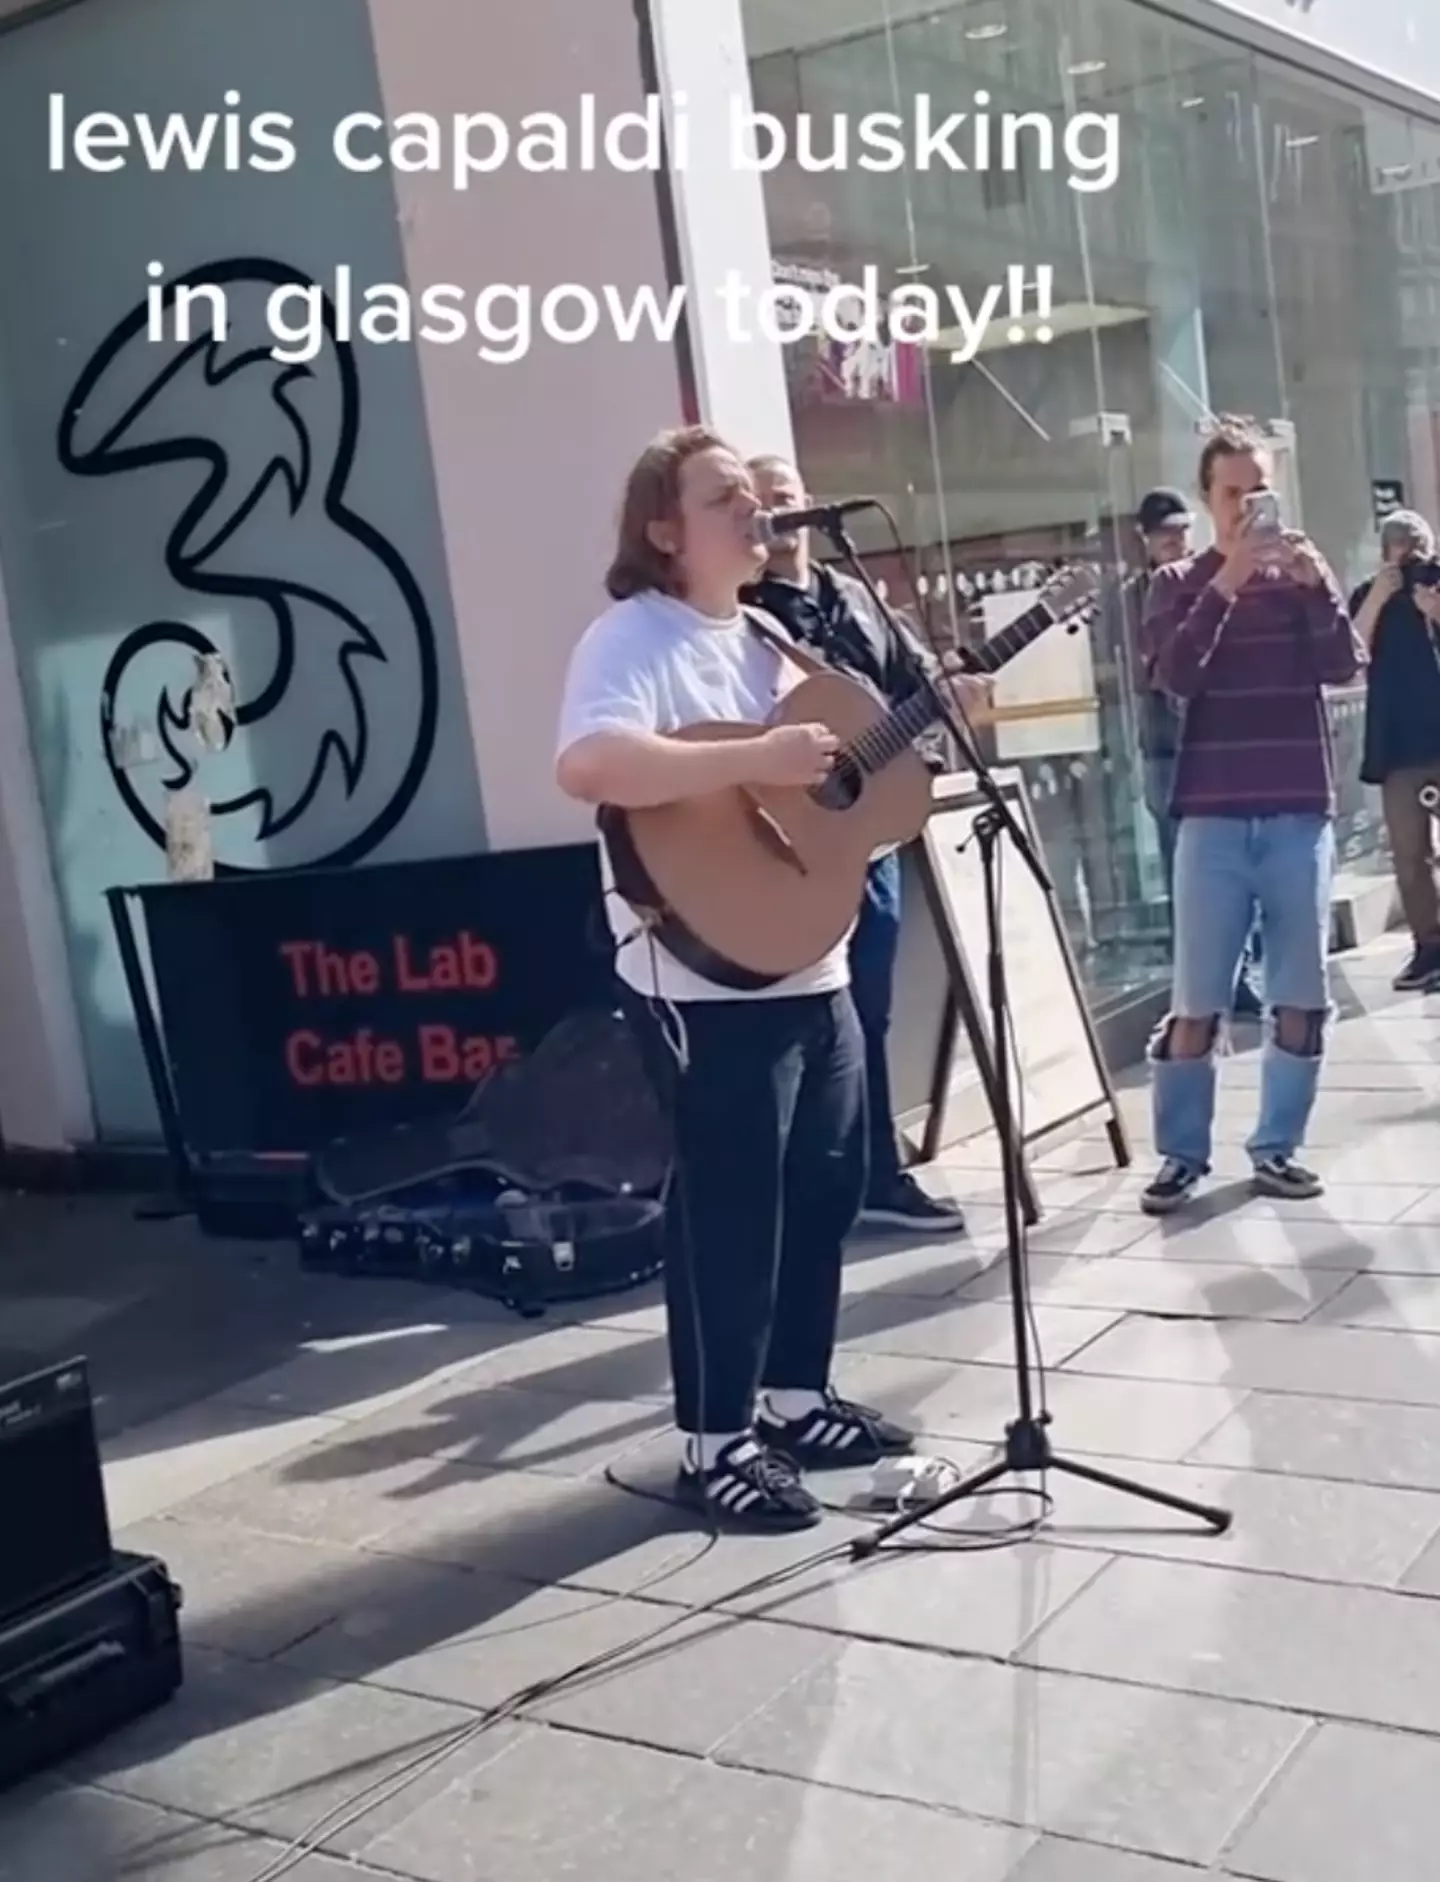 Fans were delighted to see the singer performing his hits in Glasgow.